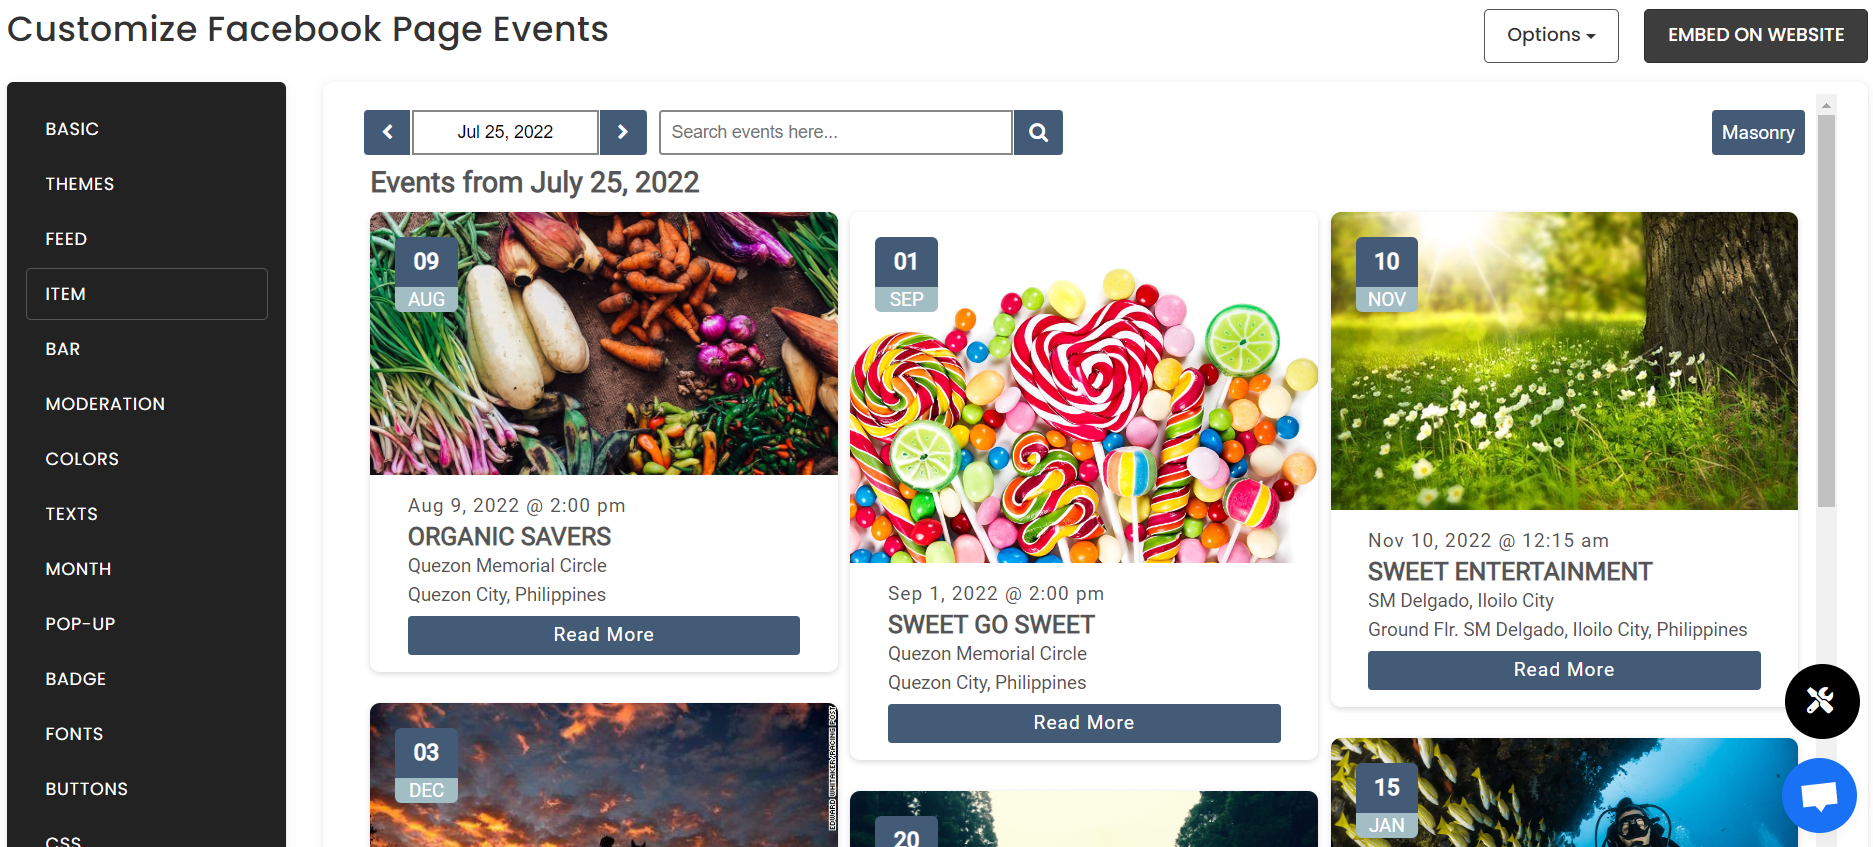 Customize your feed - Free Facebook Page Events Widget For Wix Website